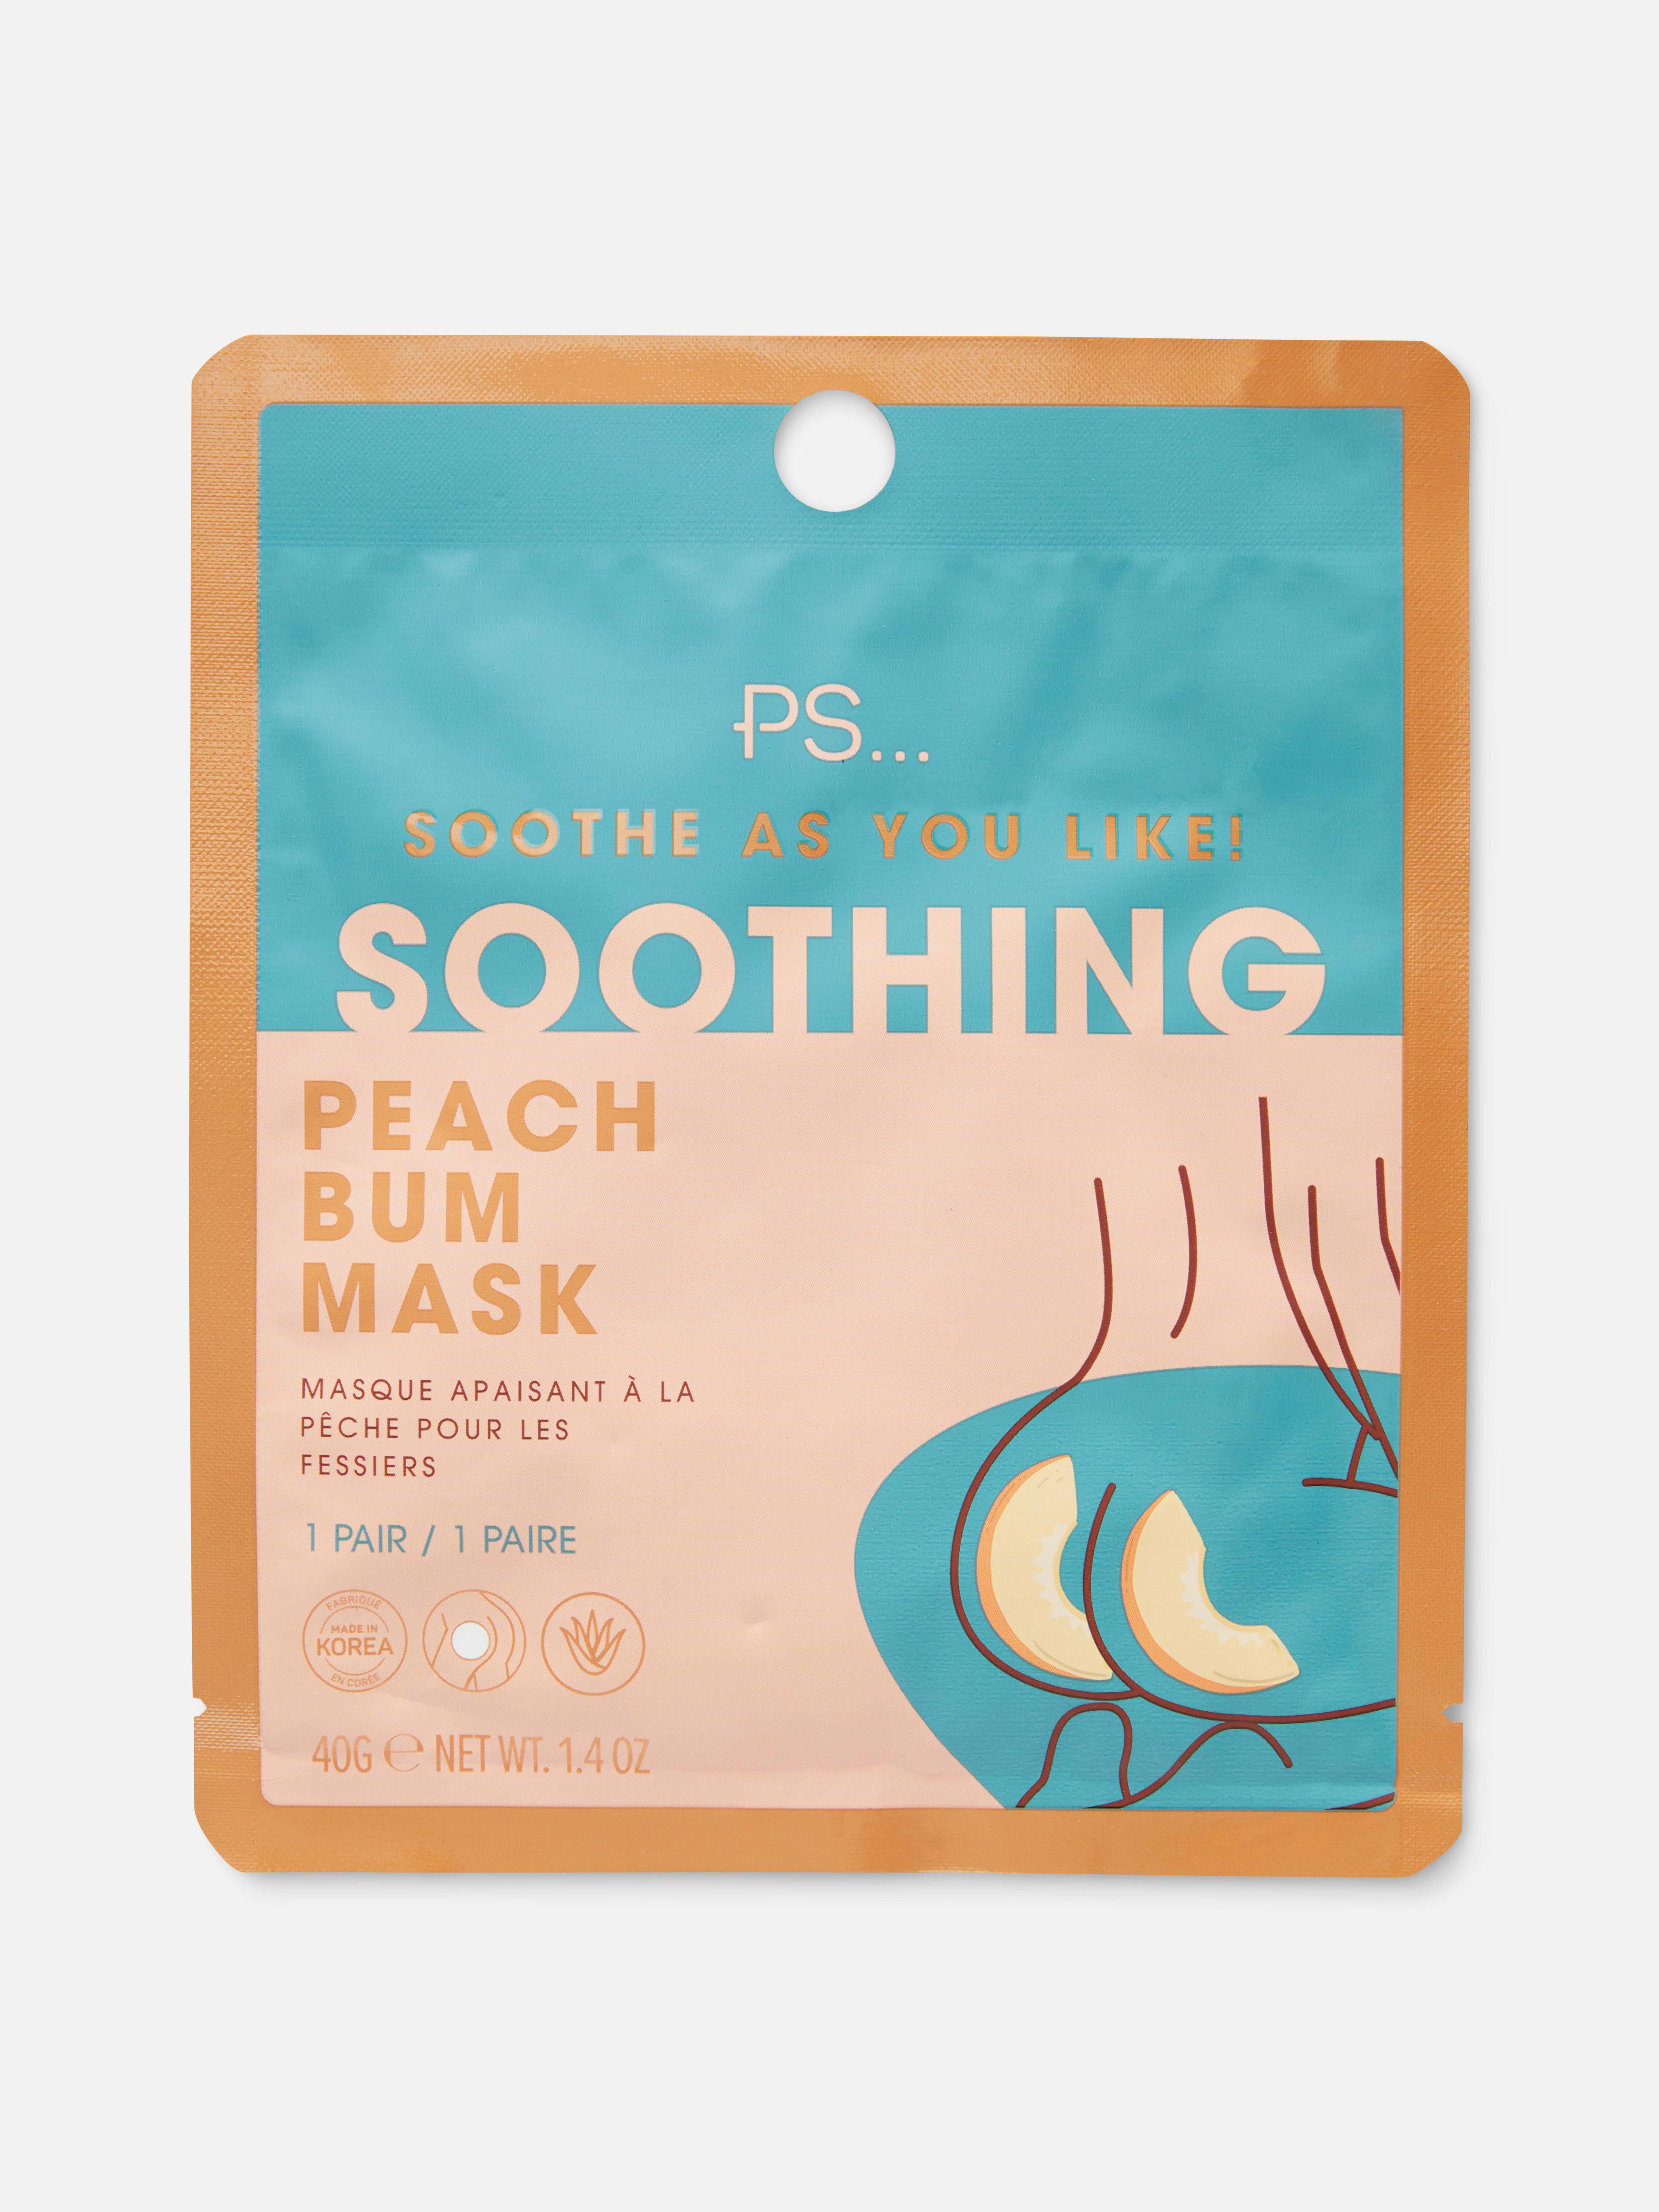 PS... Soothing Peach Bum Mask